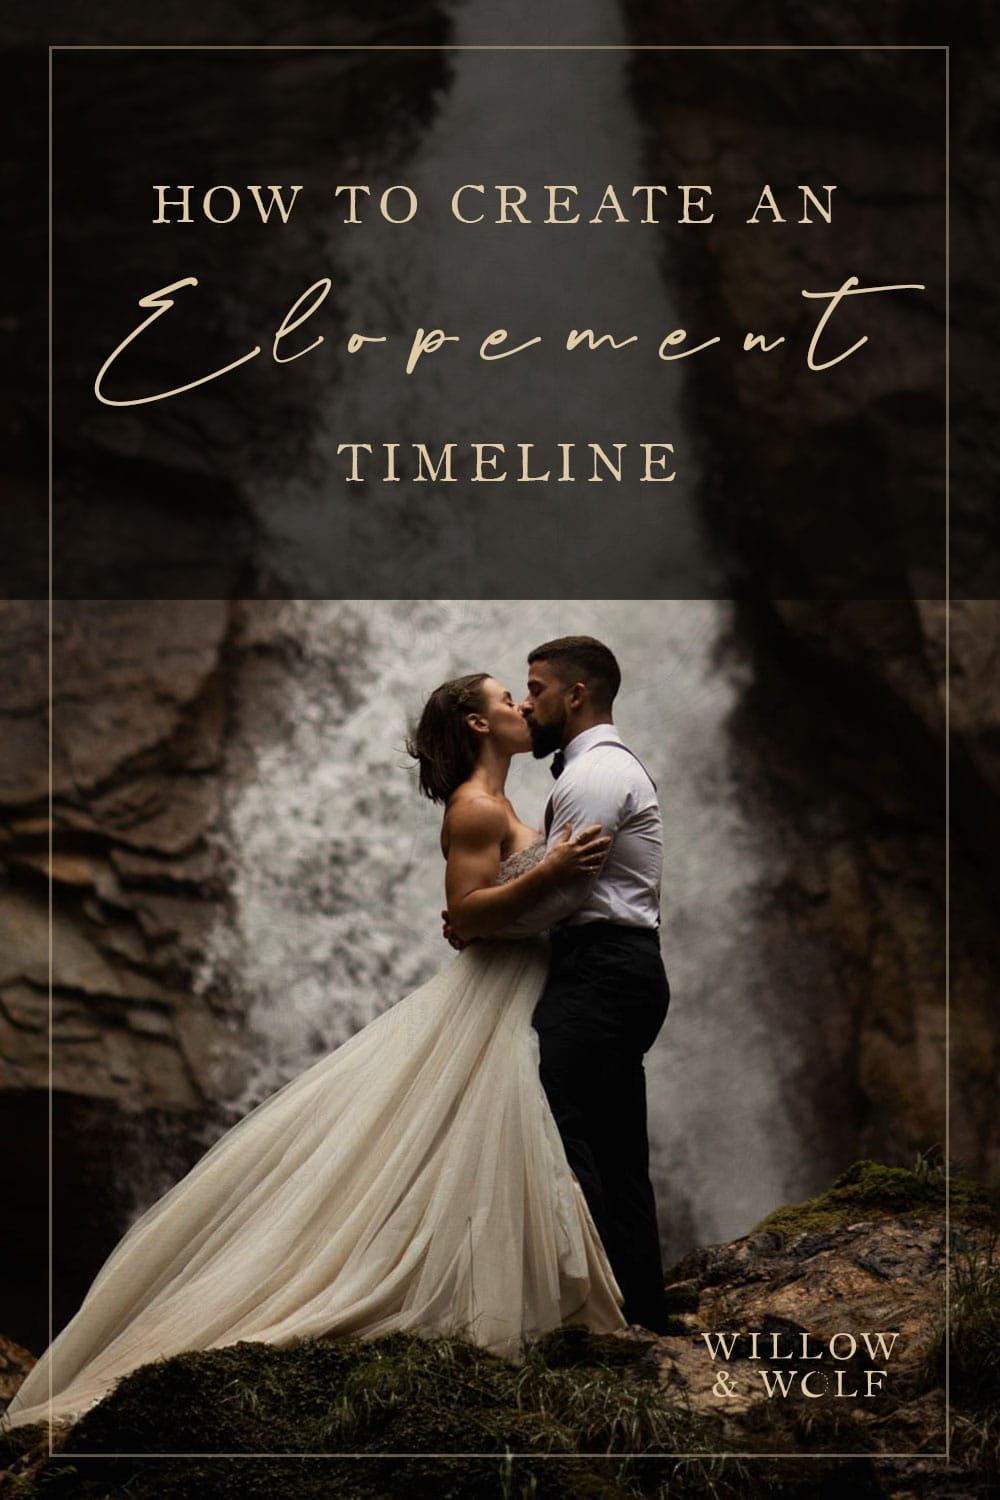 How to create an elopement timeline